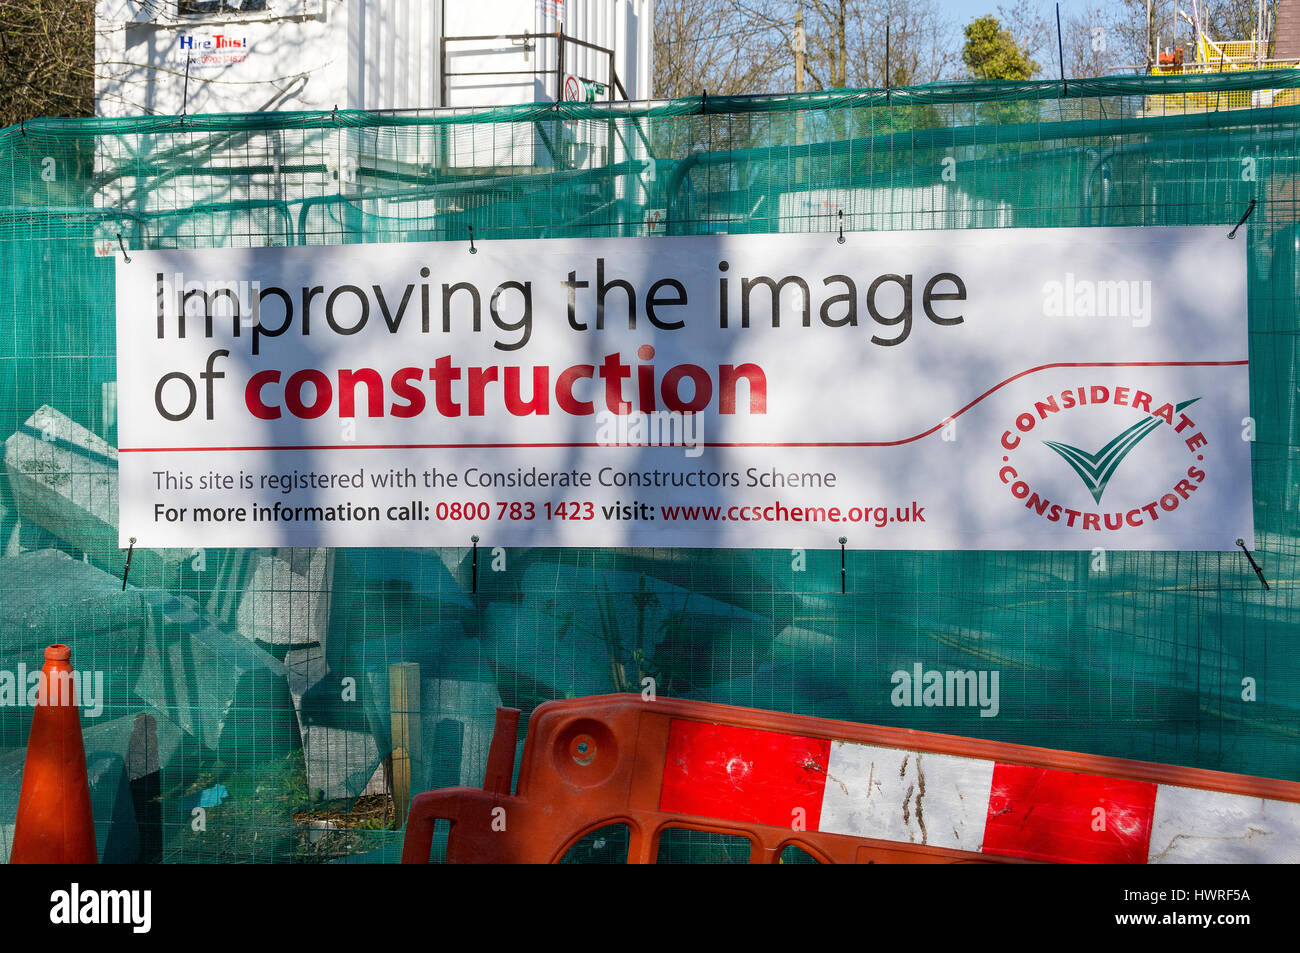 Improving the image of construction sign Stock Photo